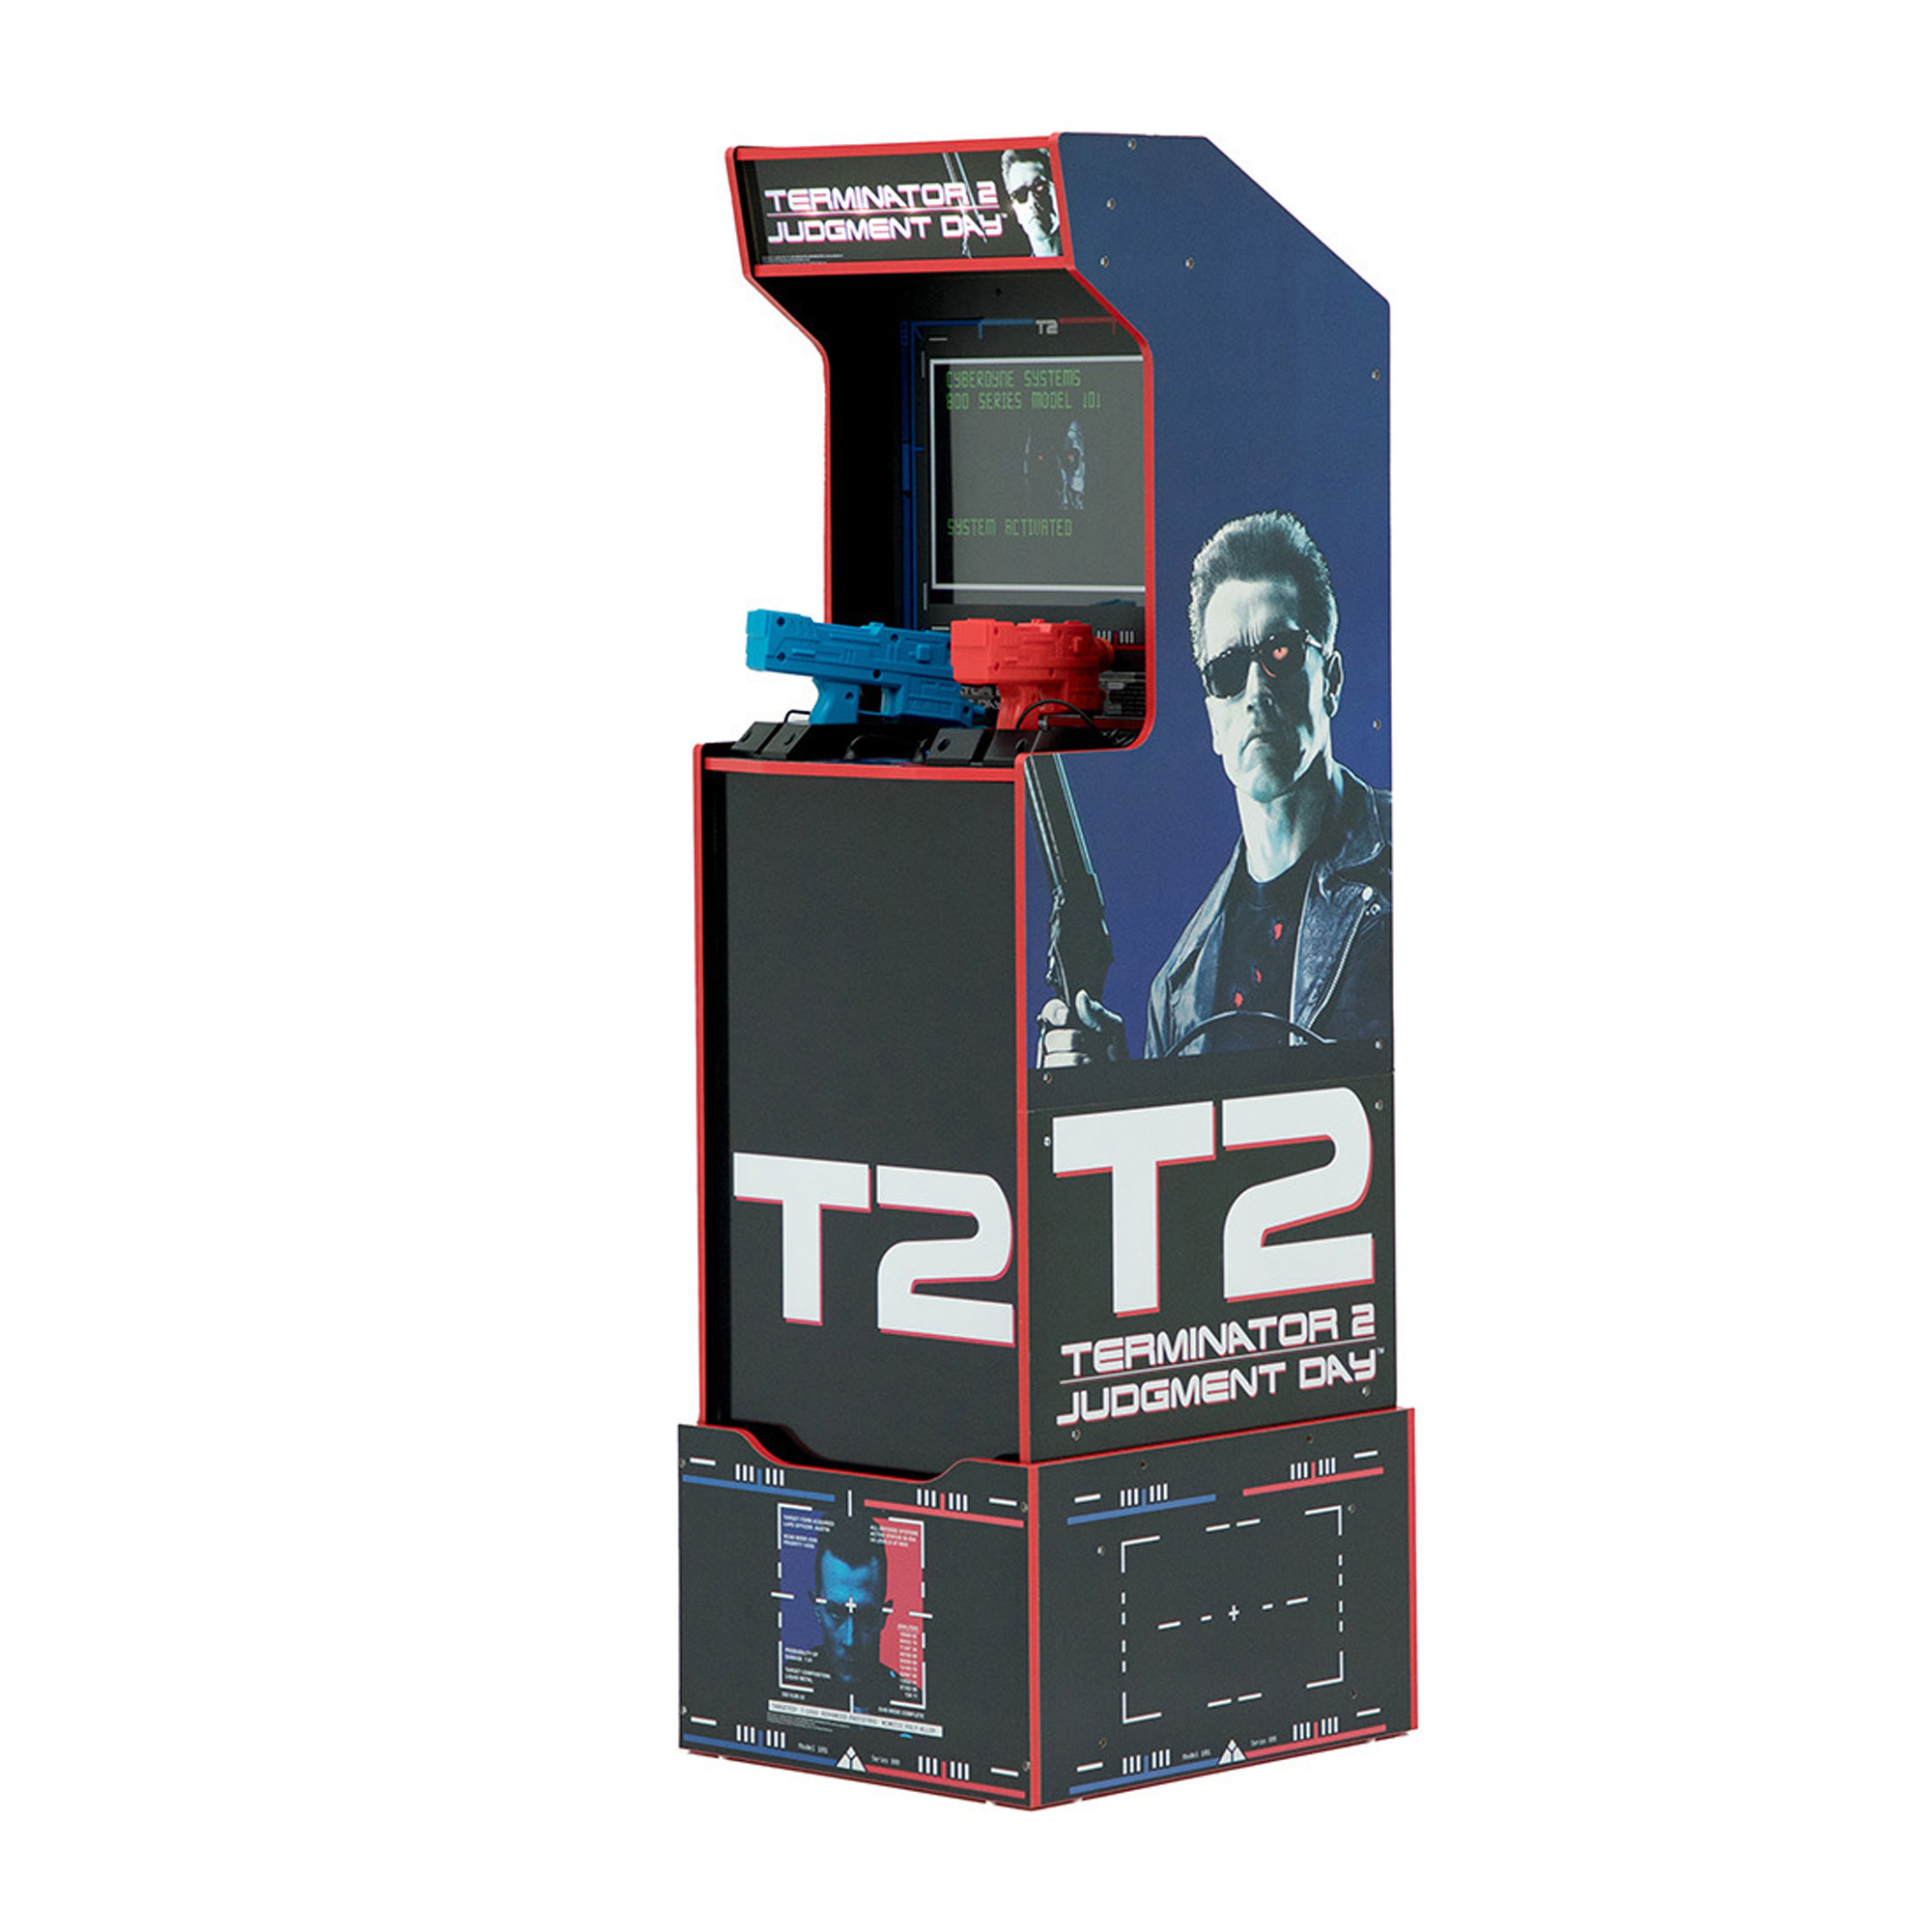 Arcade1Up - Terminator 2: Judgment Day With Riser and Lit Marquee, Arcade Game Machine - image 3 of 13